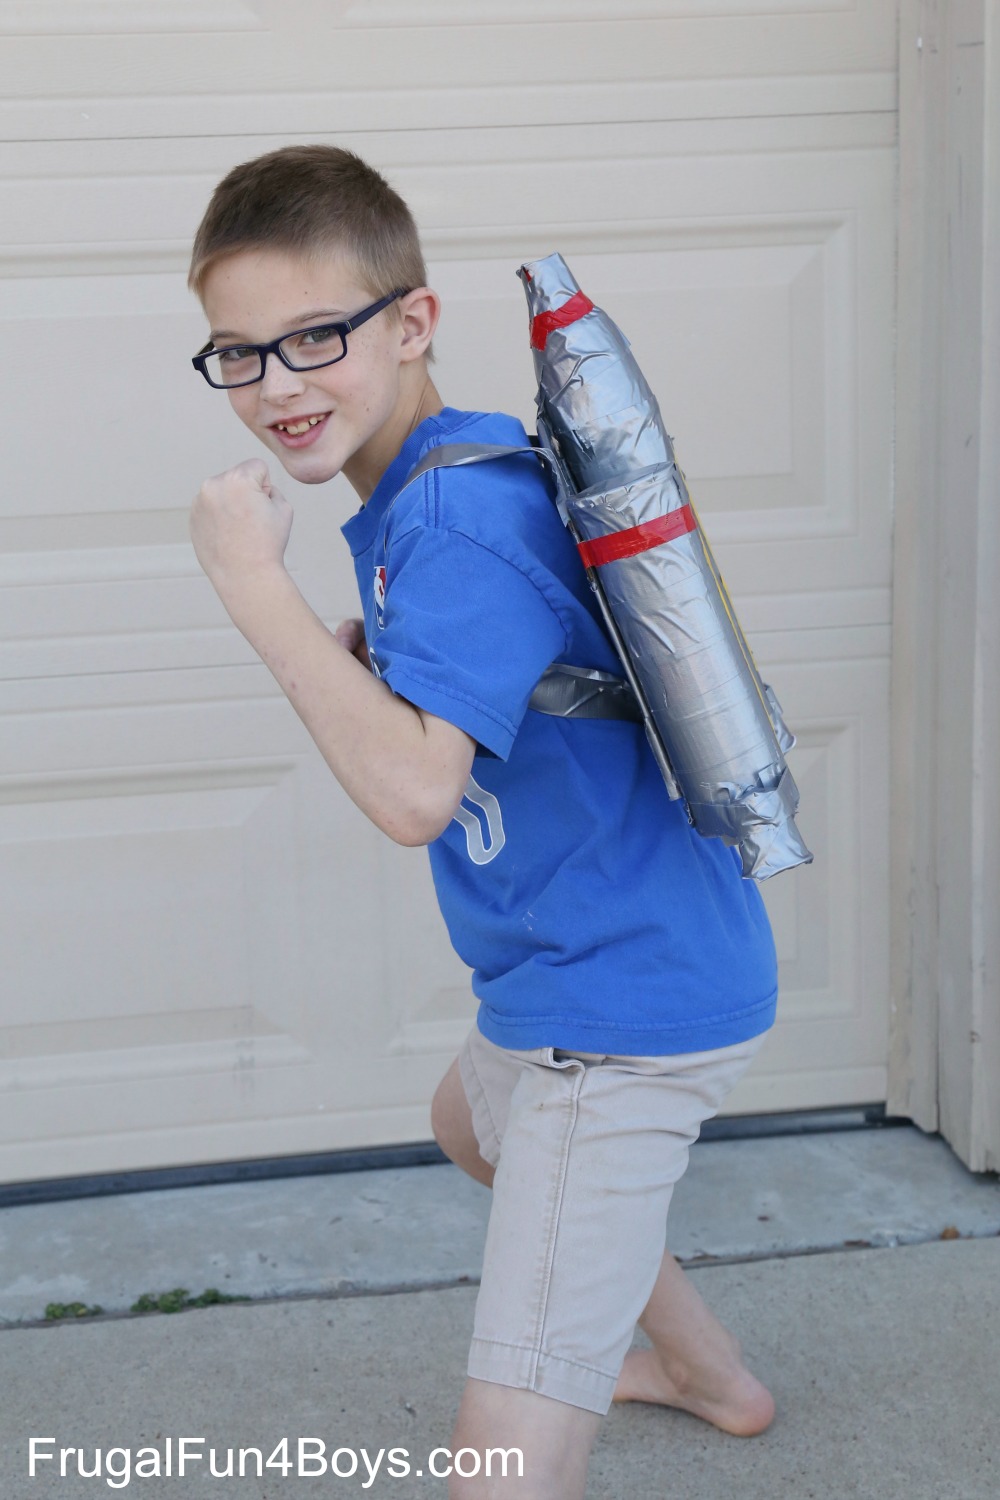 How to Make a Duct Tape Star Wars Jetpack